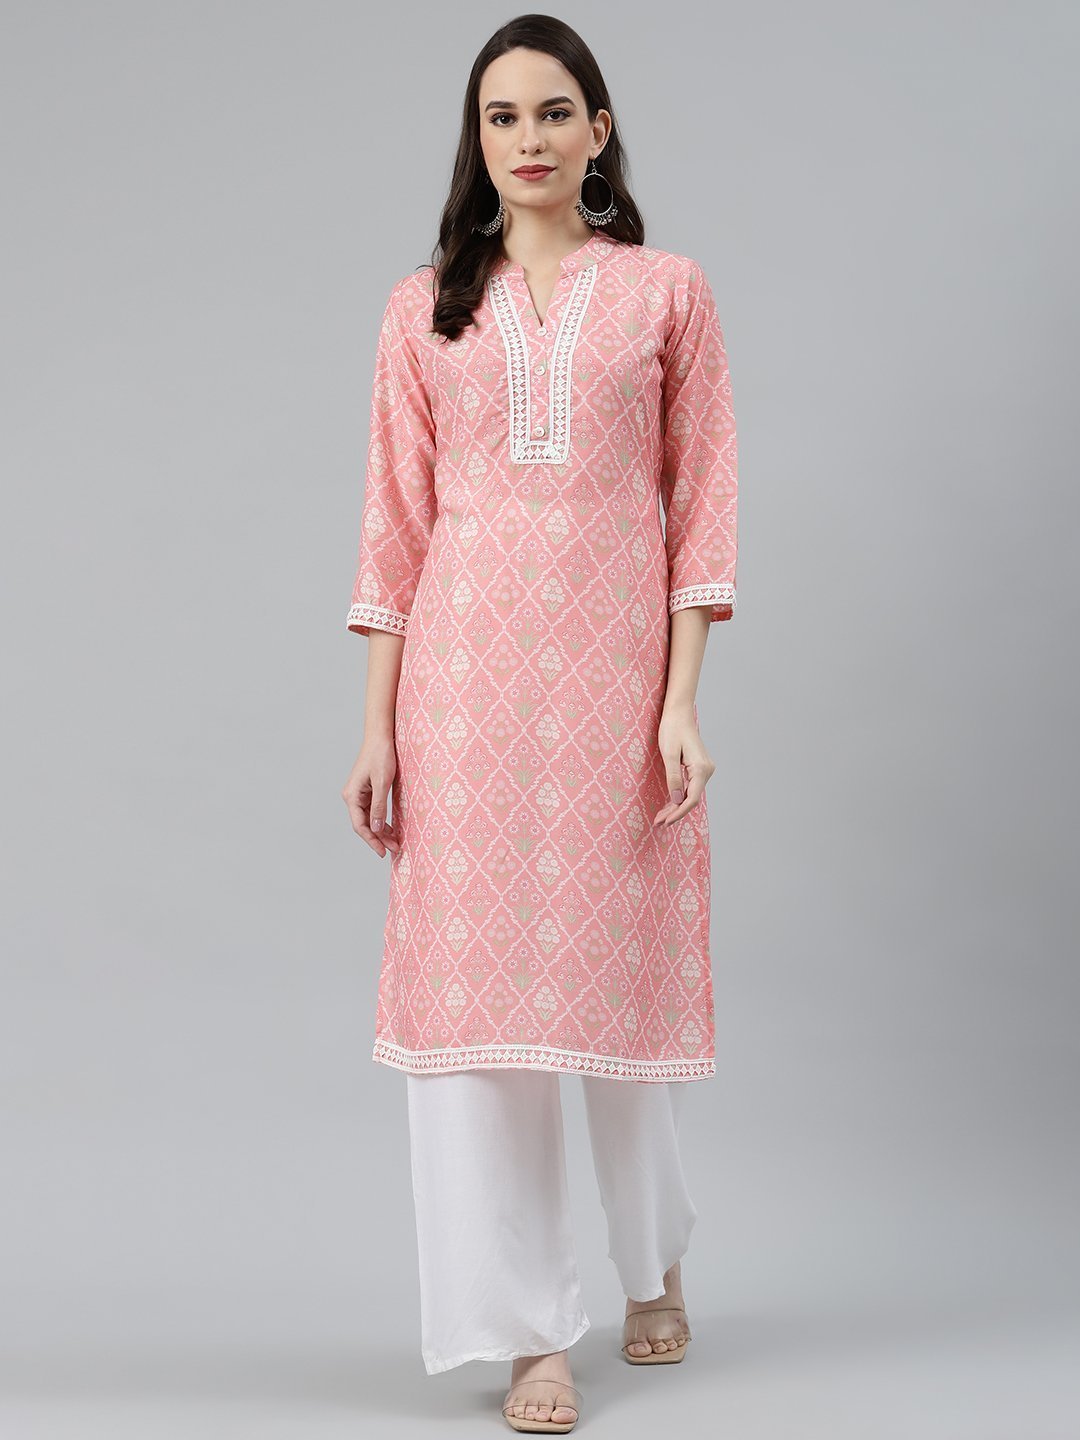 Women's Pink & Off White Floral Printed Kurta - Jompers